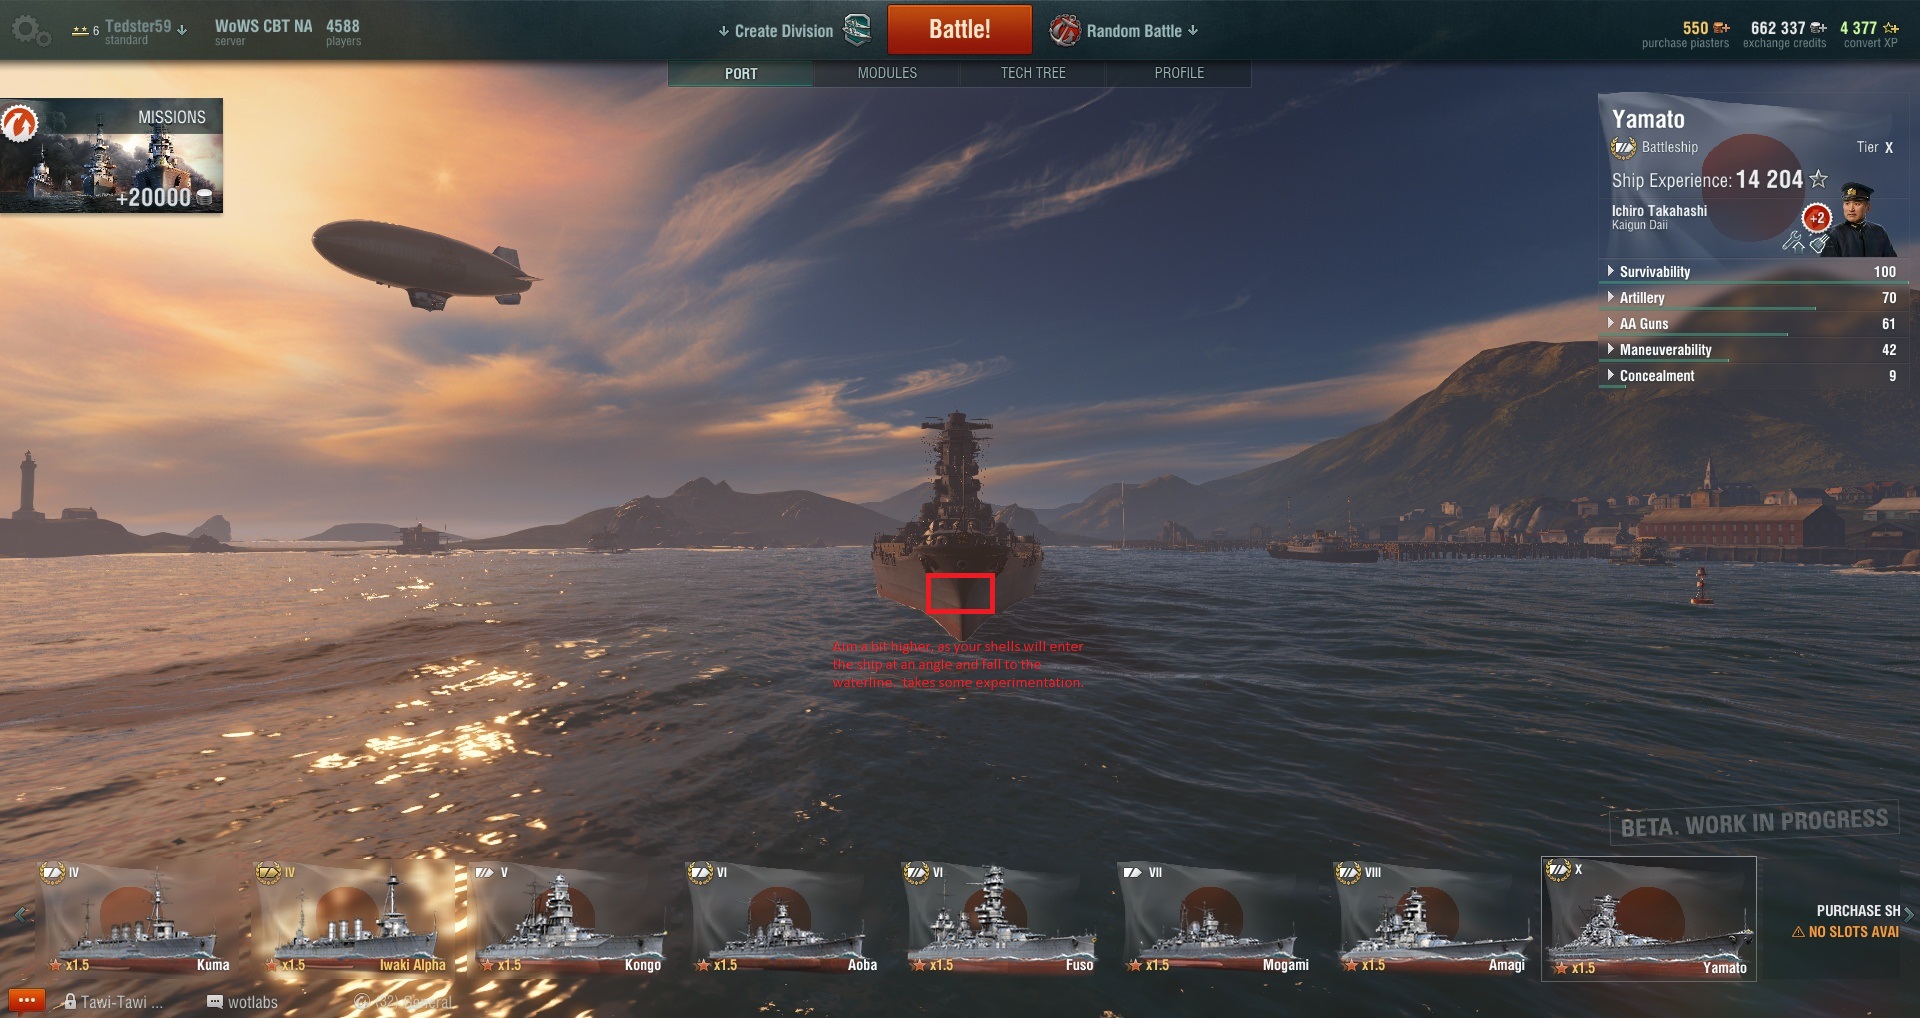 How do you aim better in world of warships legends?